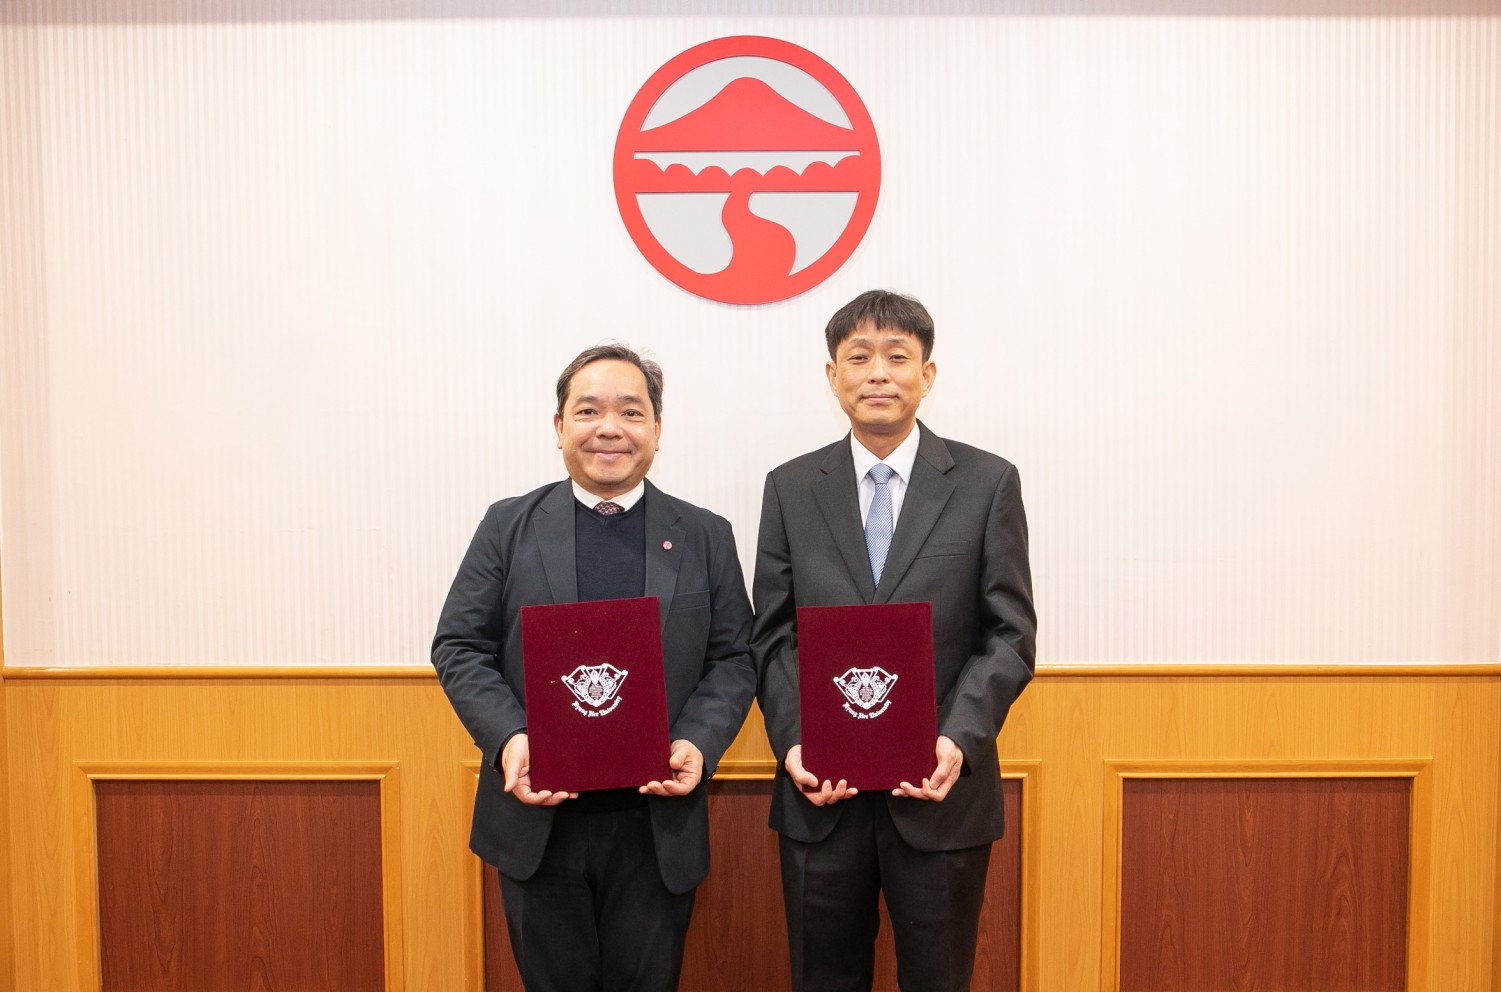  Prof Joshua Mok Ka-ho, Vice-President and Dean of the School of Graduate Studies, Lingnan University (left), and Prof Sunil Kim, Chair of the Department of Asian Studies and Director of the Double Degree Programme (right).